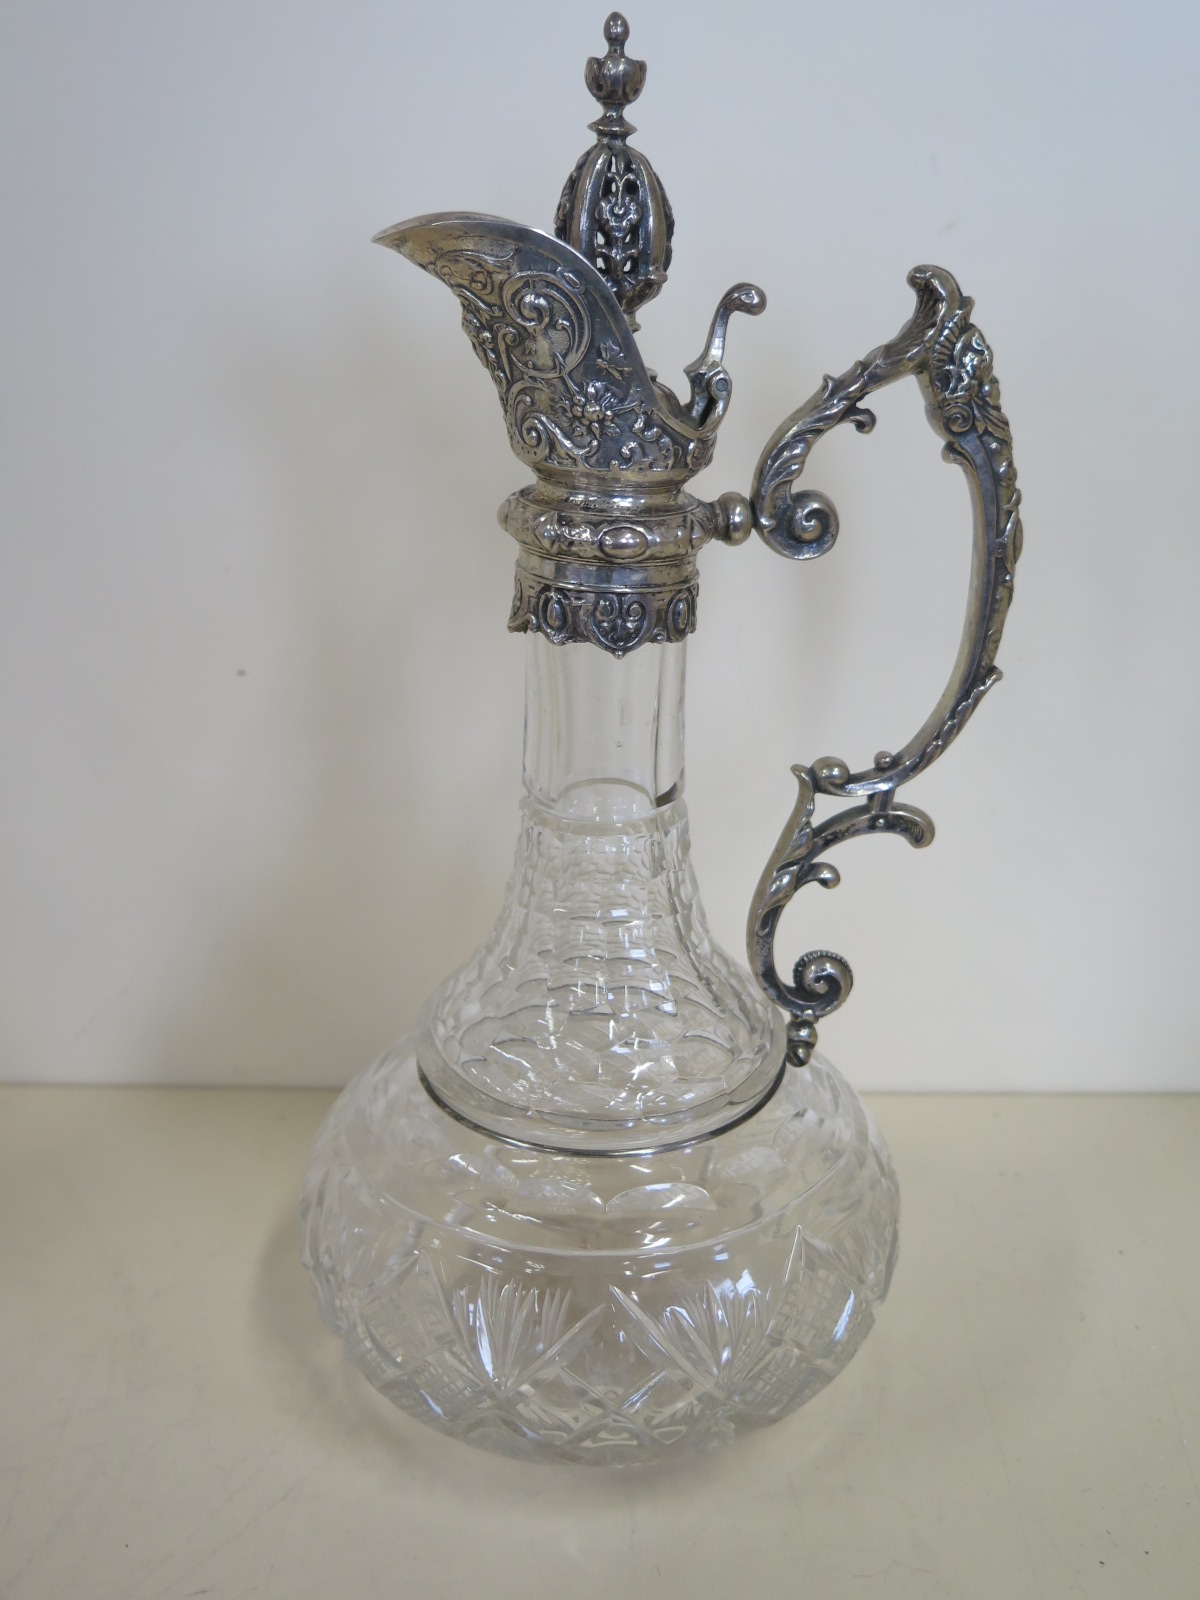 A cut glass claret jug with a silver top, marked 925 - 30cm tall, in good clean condition